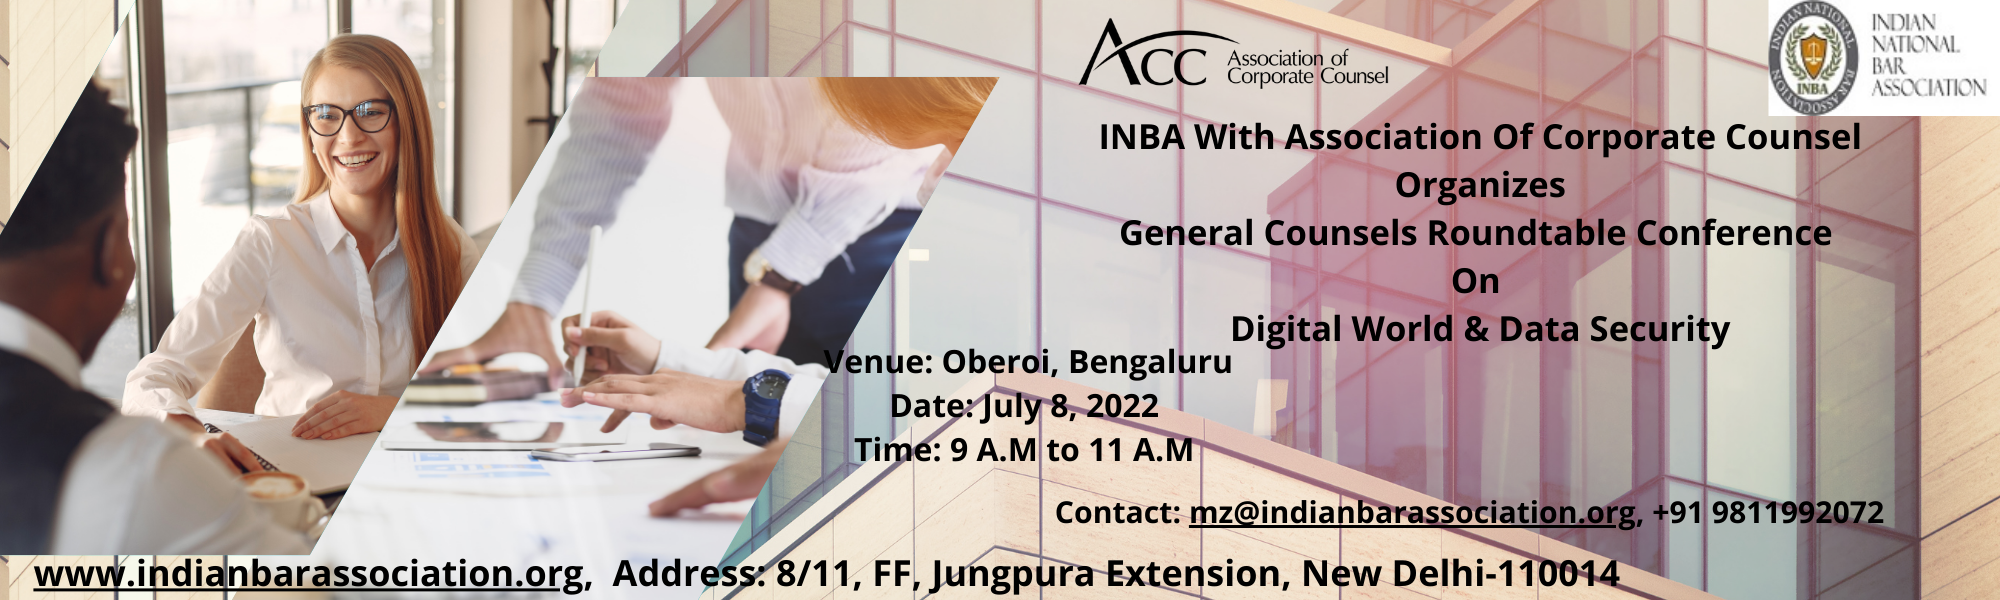 INBA With Association Of Corporate Counsel Organizes Roundtable Conference On July 8, 2022 At Oberoi, Bengaluru